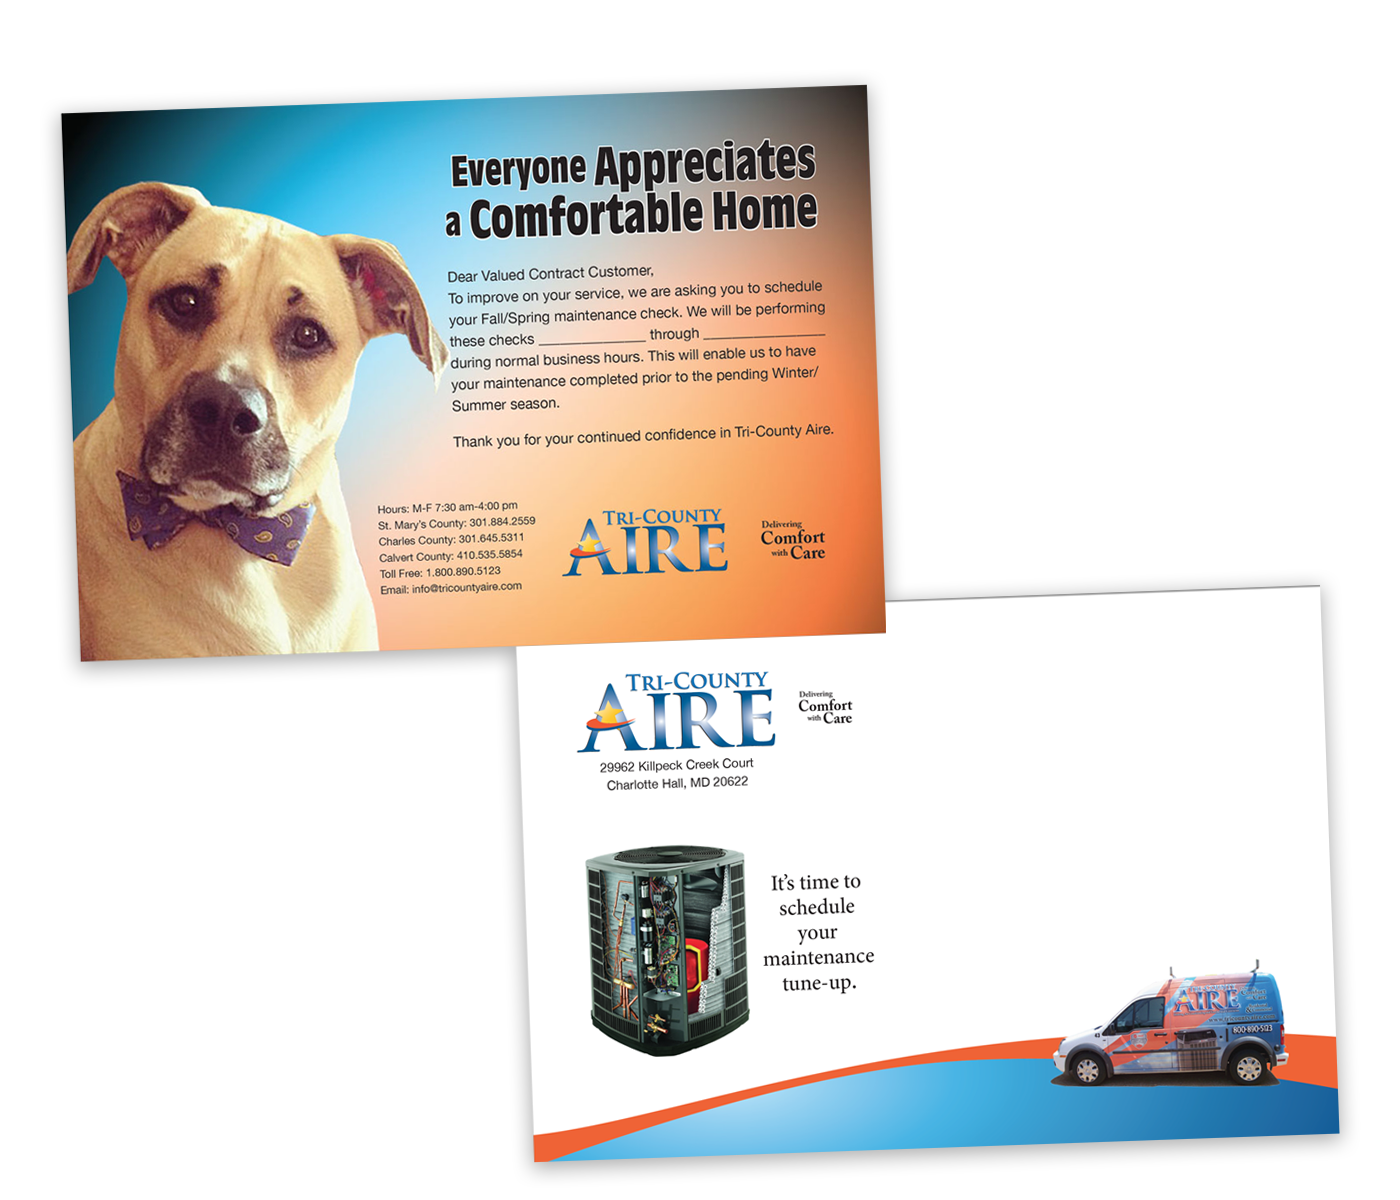 A picture of a dog and an advertisement for aire air conditioning